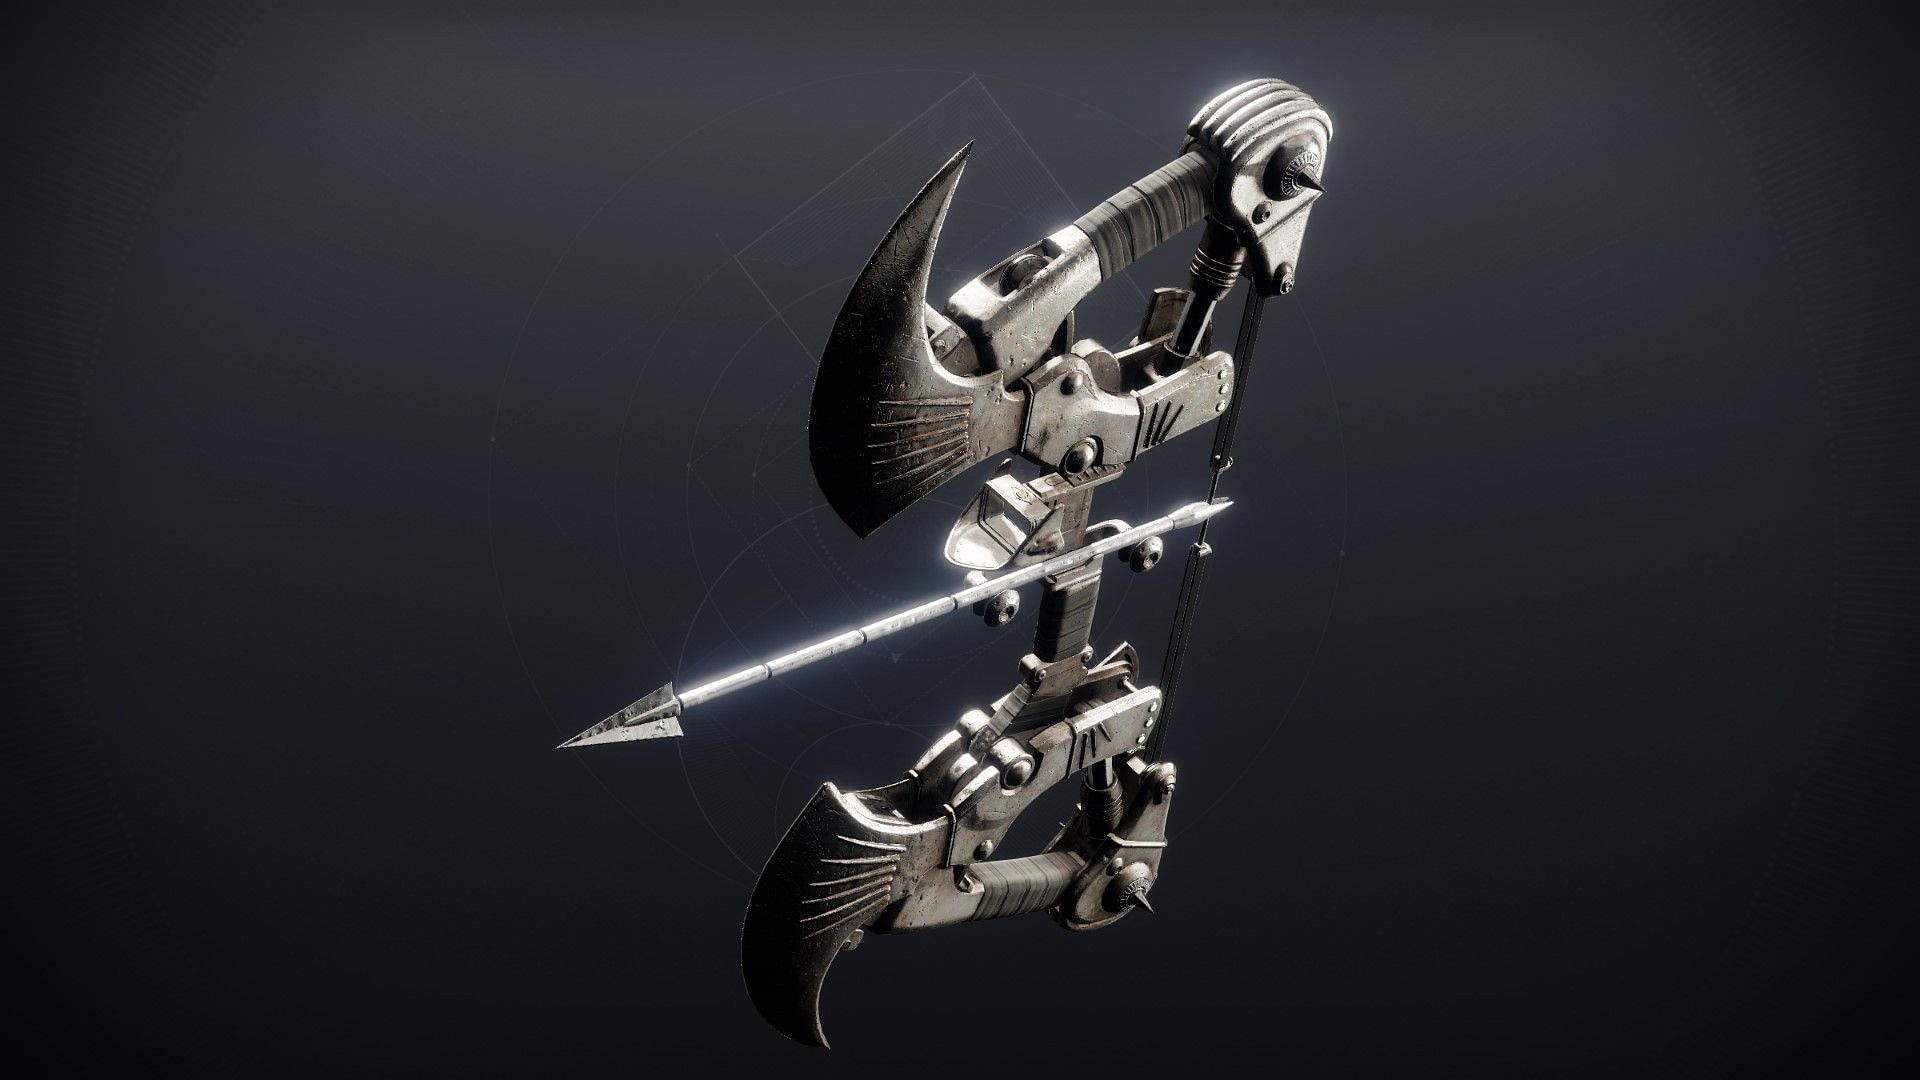 The Grimmest Hunter ornament for the Leviathan